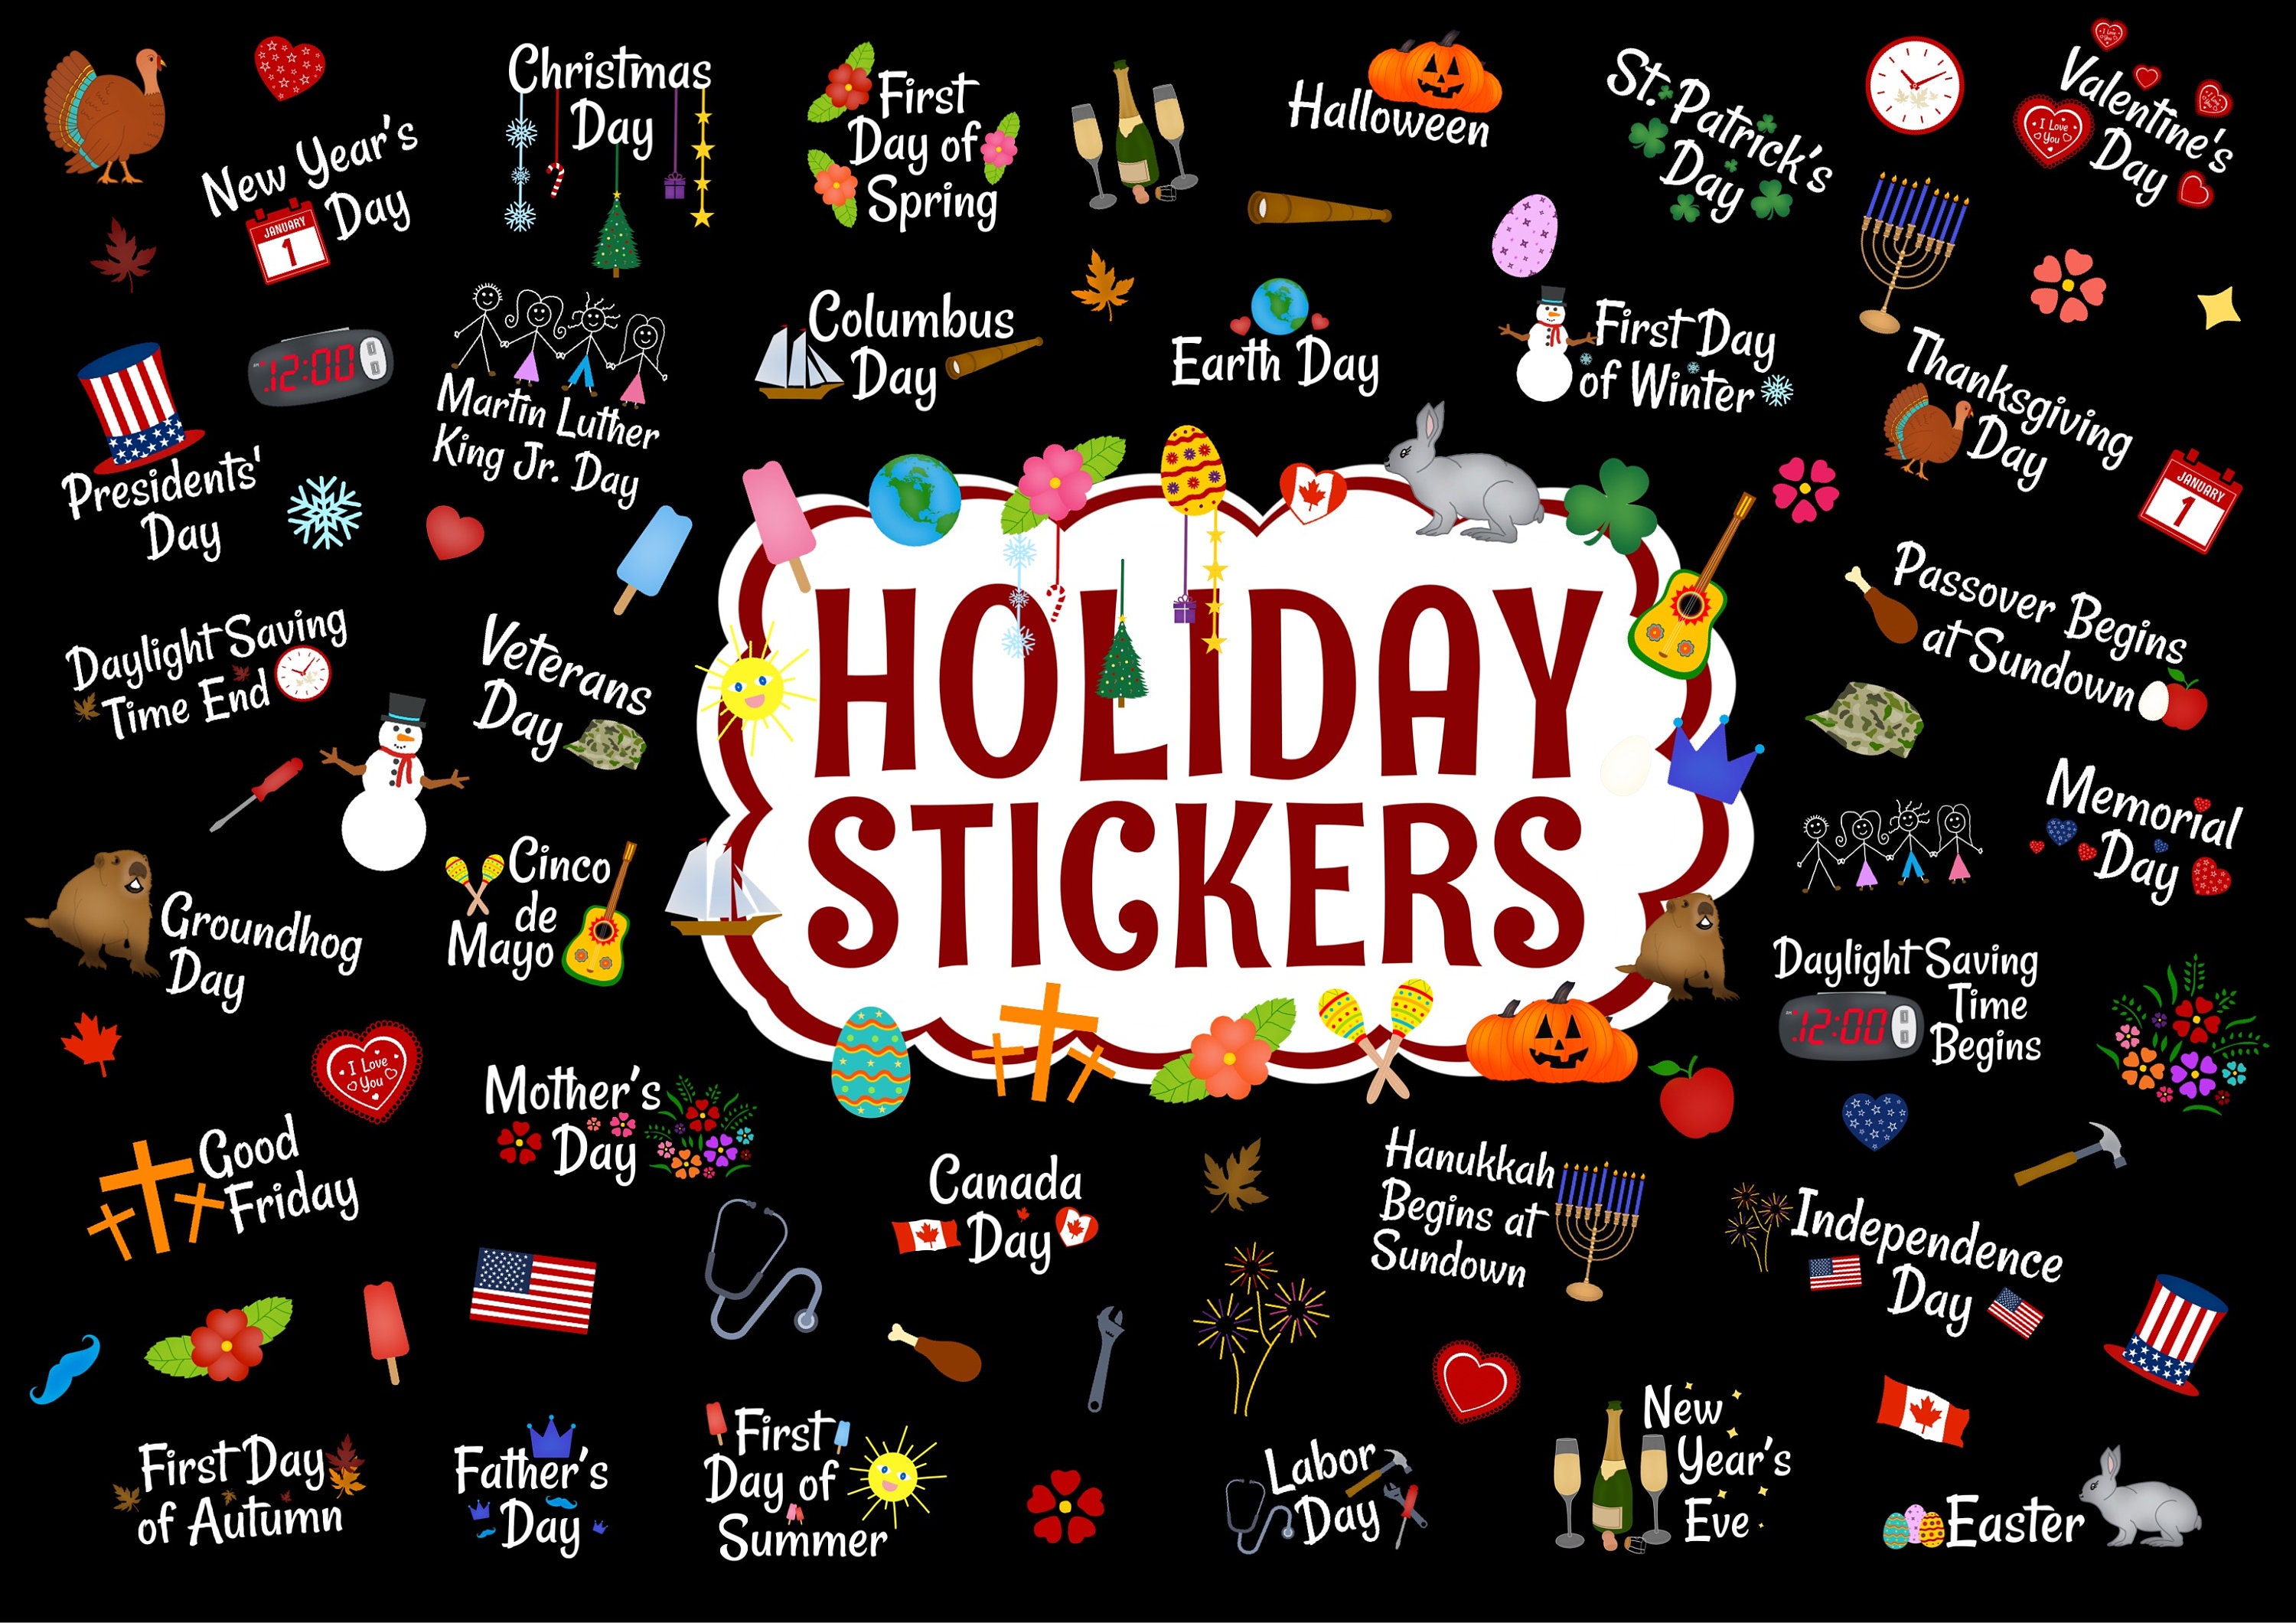 Holiday Planner Stickers, Holiday Stickers Goodnotes, Holiday Stickers,  Precropped, Goodnotes Stickers, Stickers for Planner 